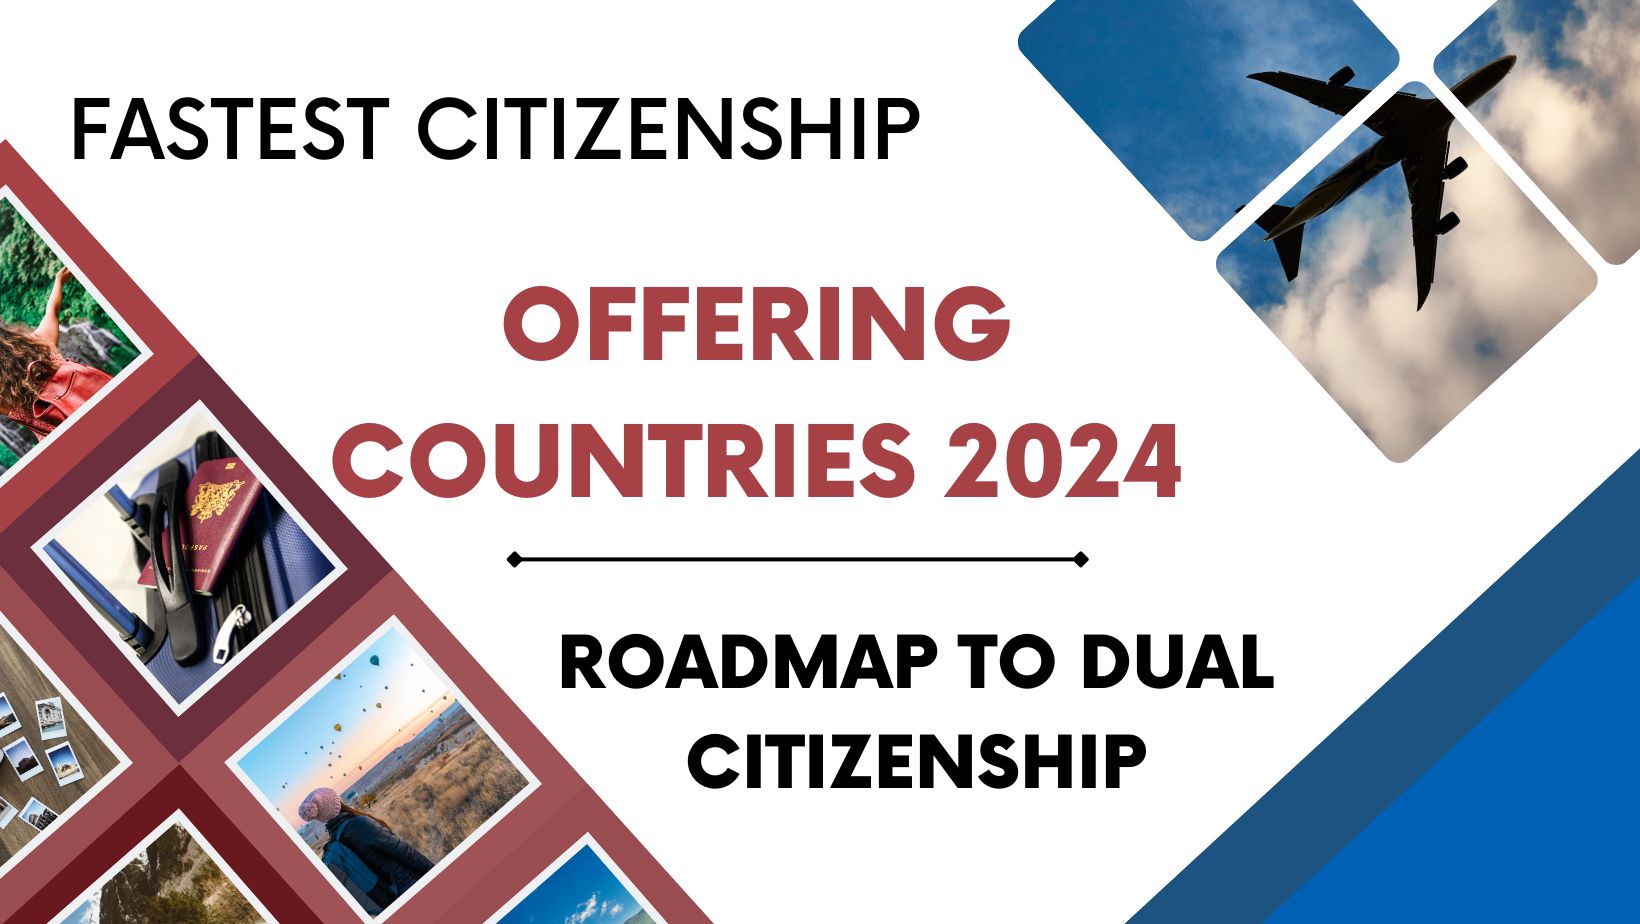 Fastest Citizenship Offering Countries 2024 Roadmap To Dual Citizenship 